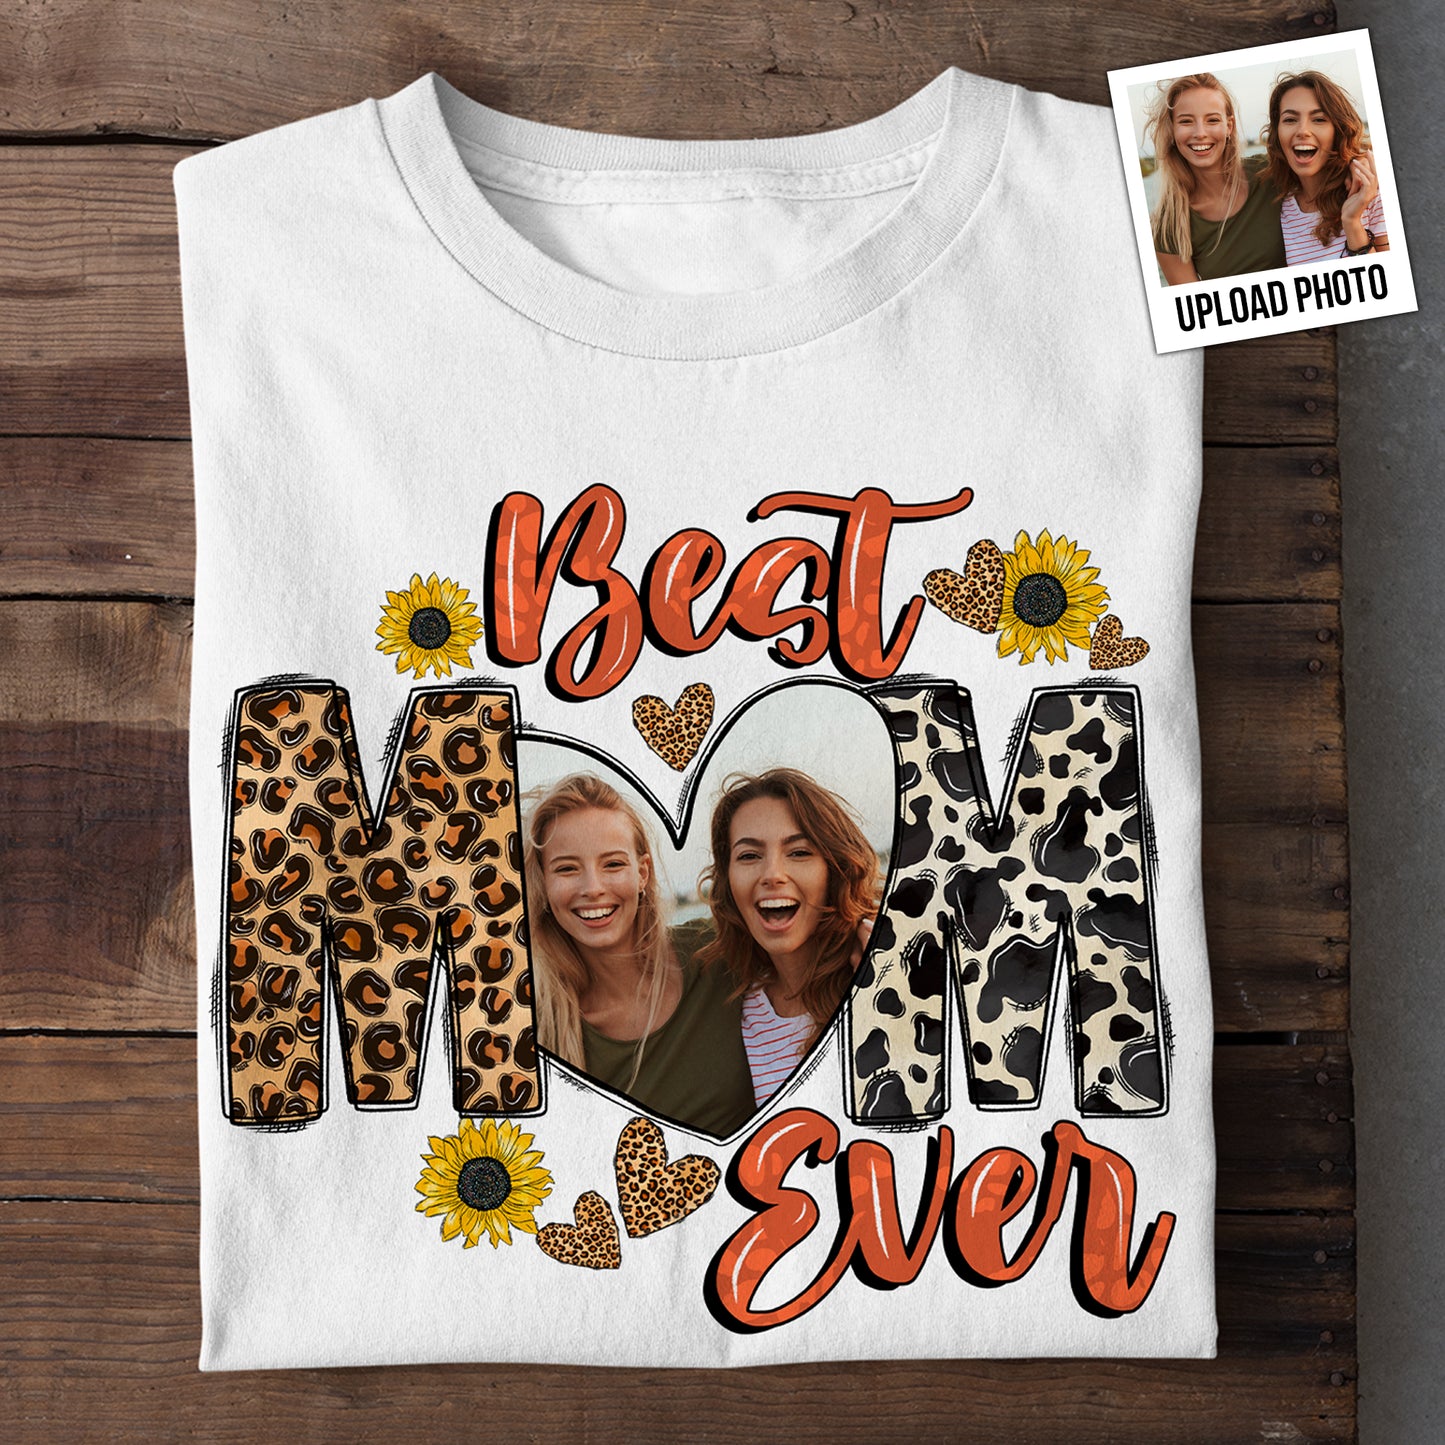 The Best Mom - Personalized Photo Shirt